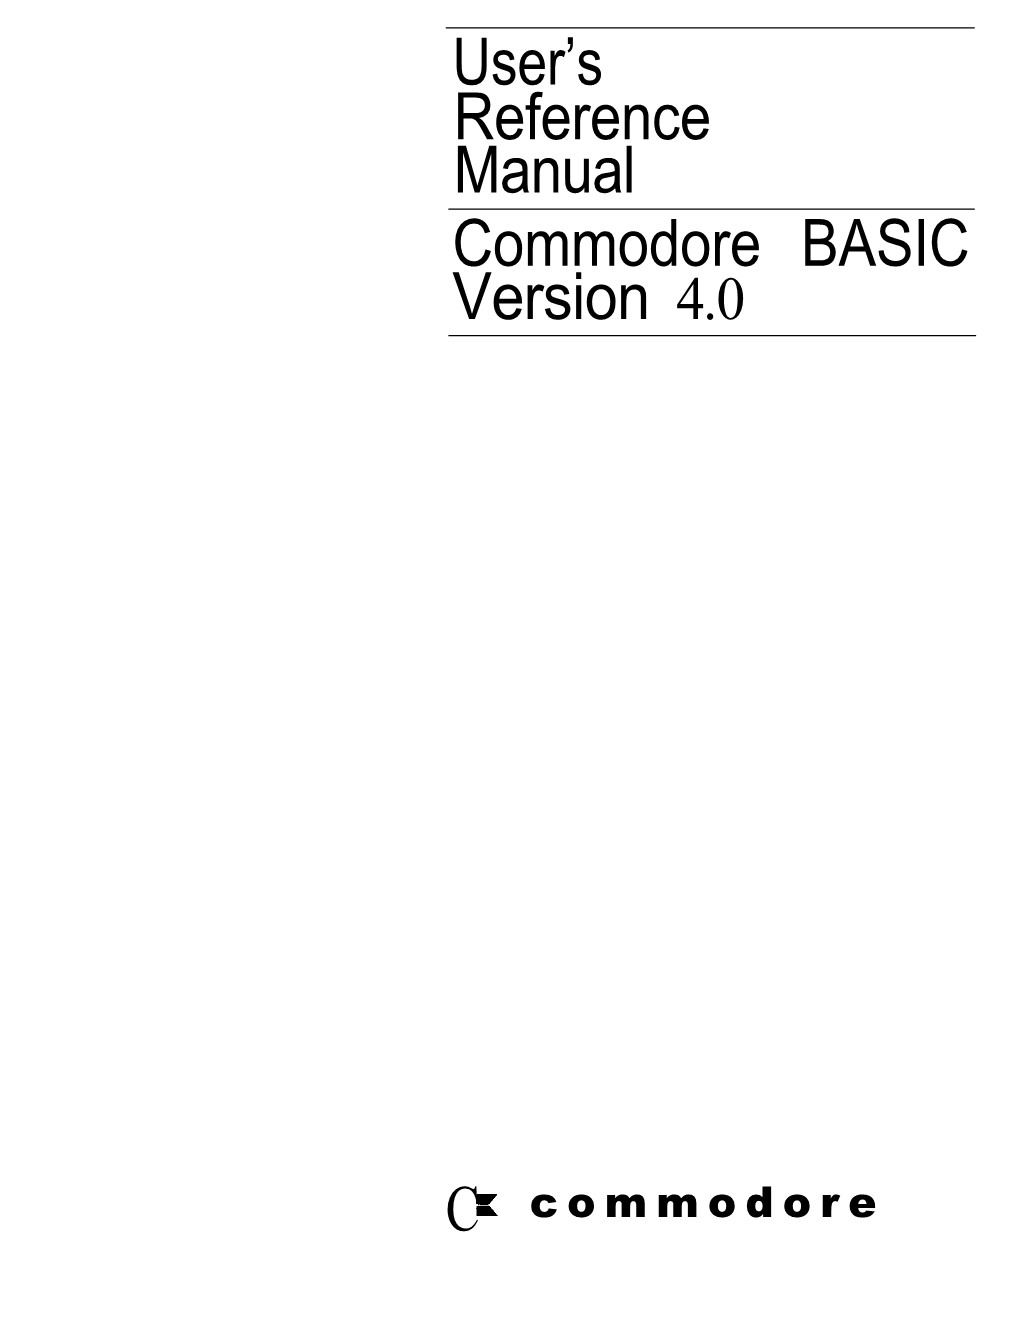 User's Reference Manual Commodore BASIC Version